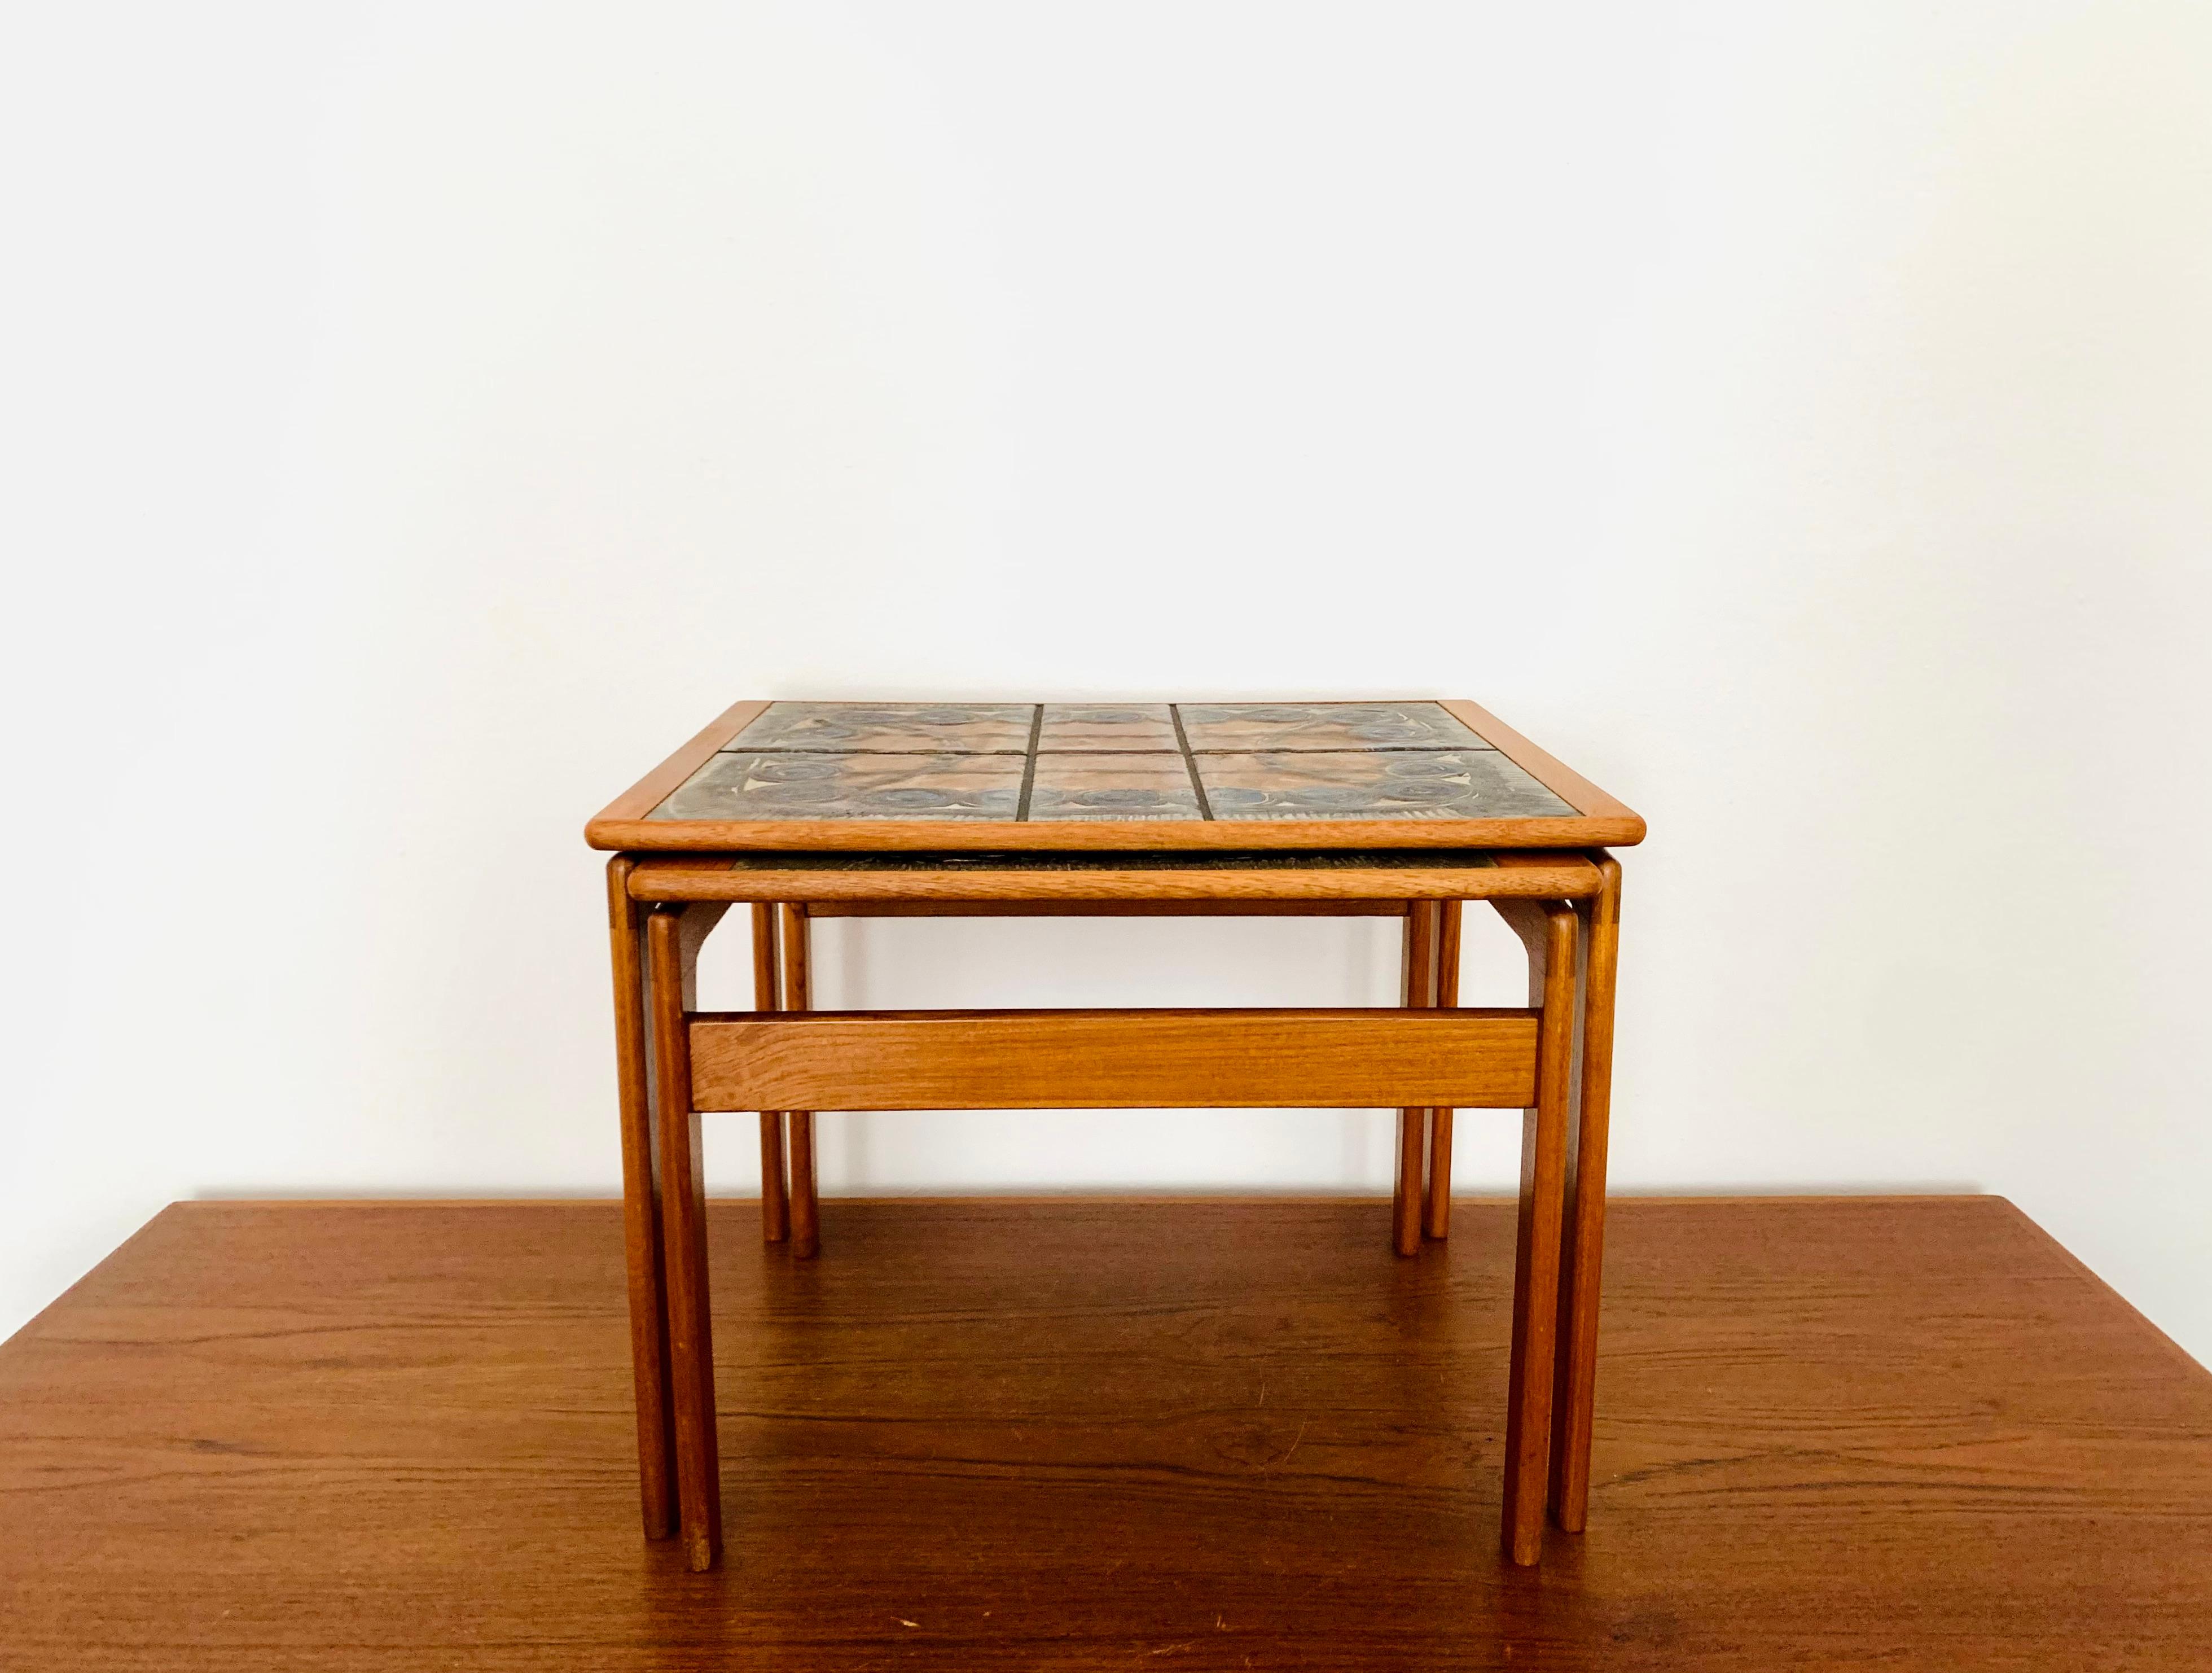 Extremely beautiful Danish teak tables with ceramic inlays from the 1960s.
Wonderful and high quality design.
An enrichment for every home.
The hand-painted and very decorative tiles are special.

Design: Ox Art
Manufacturer: